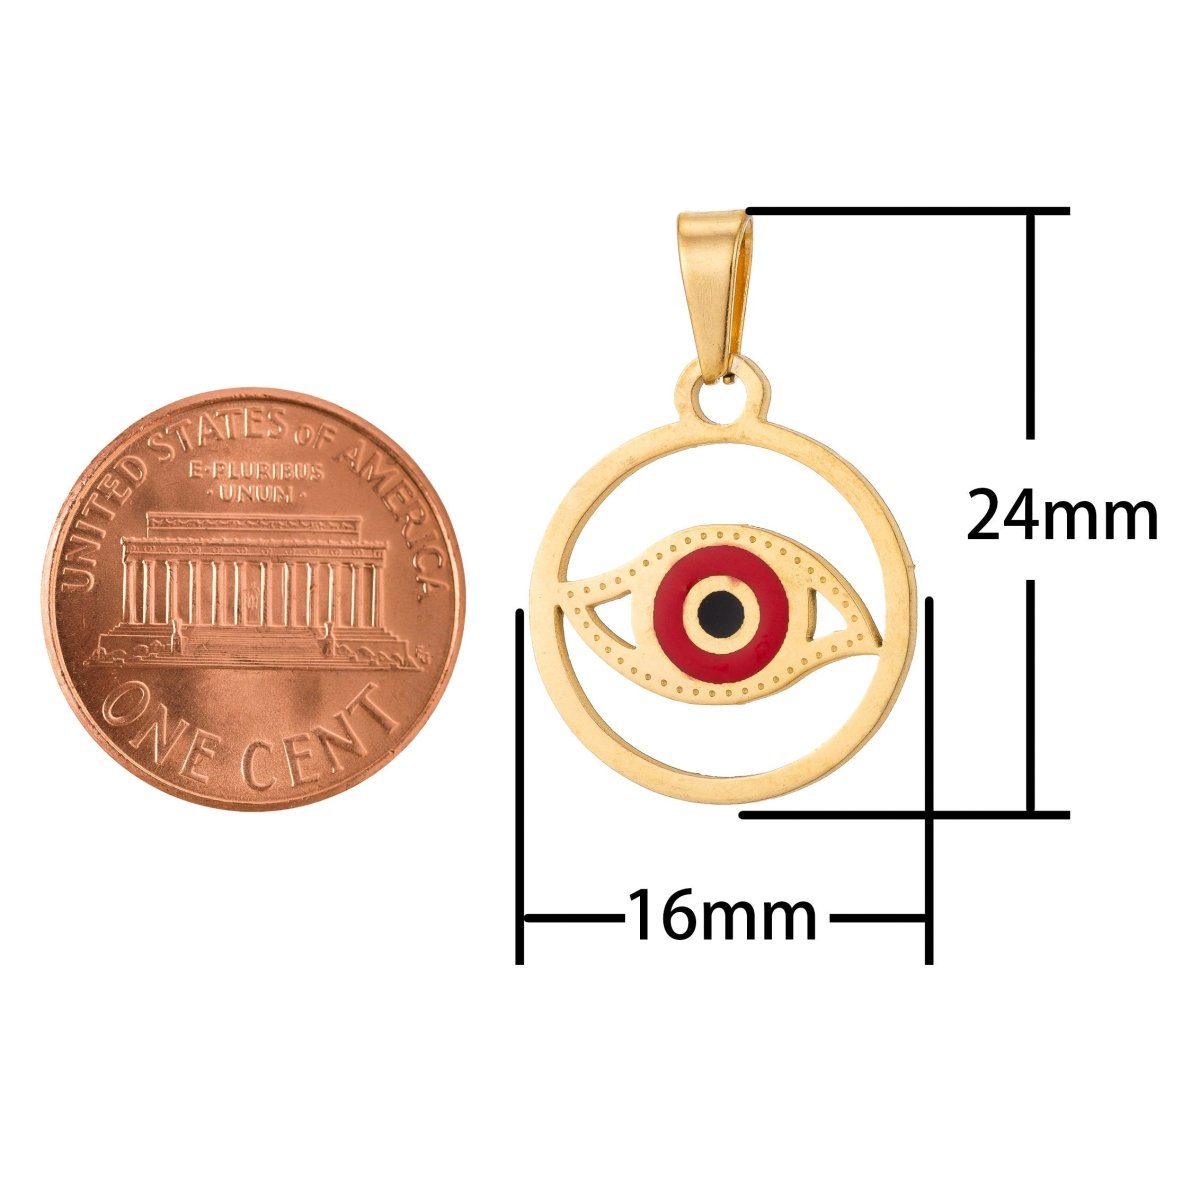 Stainless Steel Red Evil Eye Charm Pendant with Bails Spiritual Protection Amulet Necklace Findings for Jewelry Making J-552 - DLUXCA